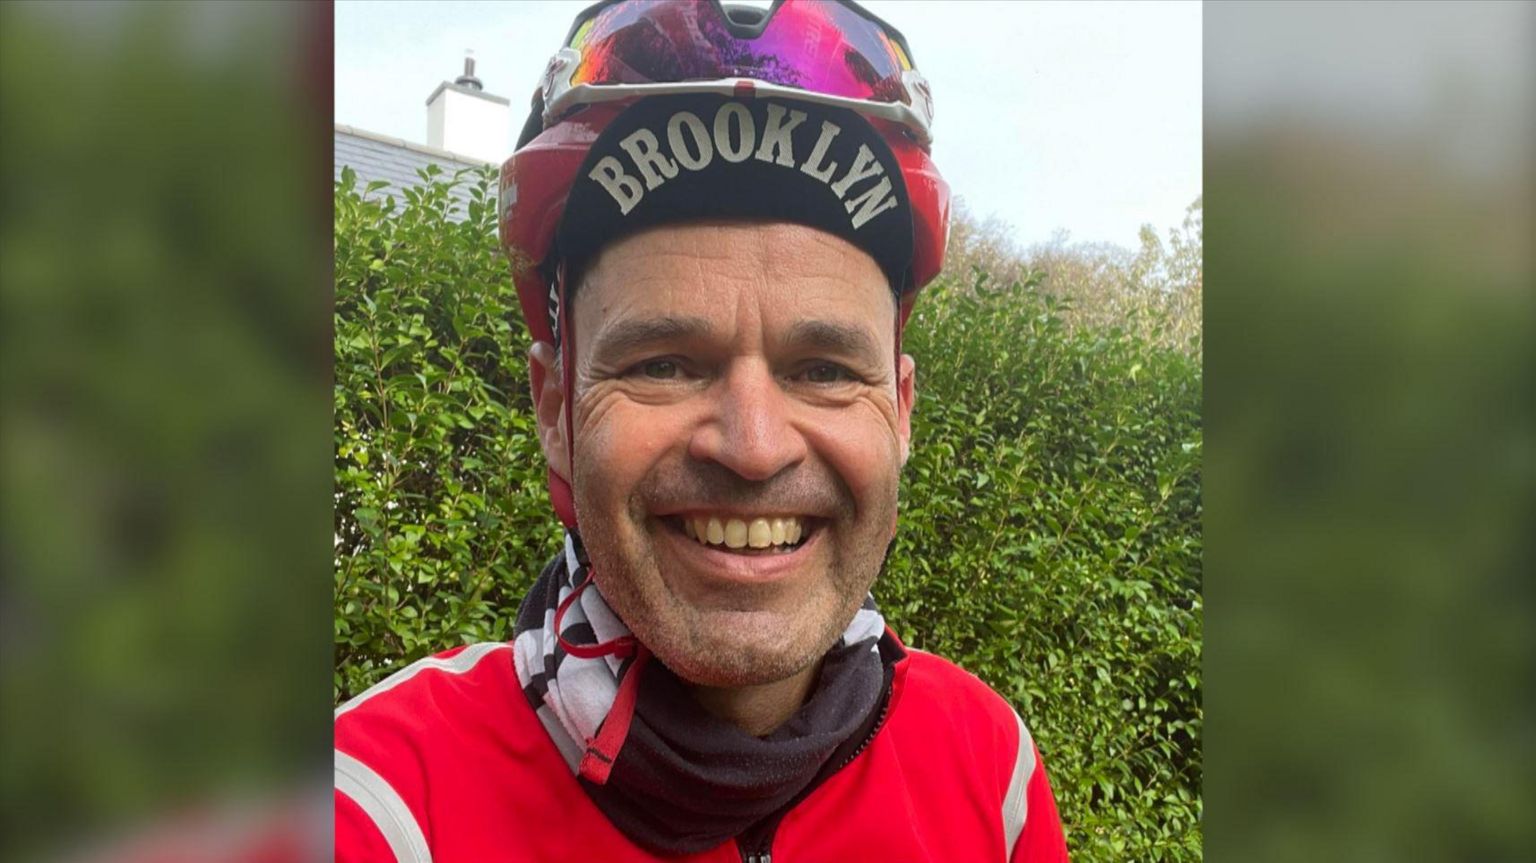 A smiling man in cycling gear